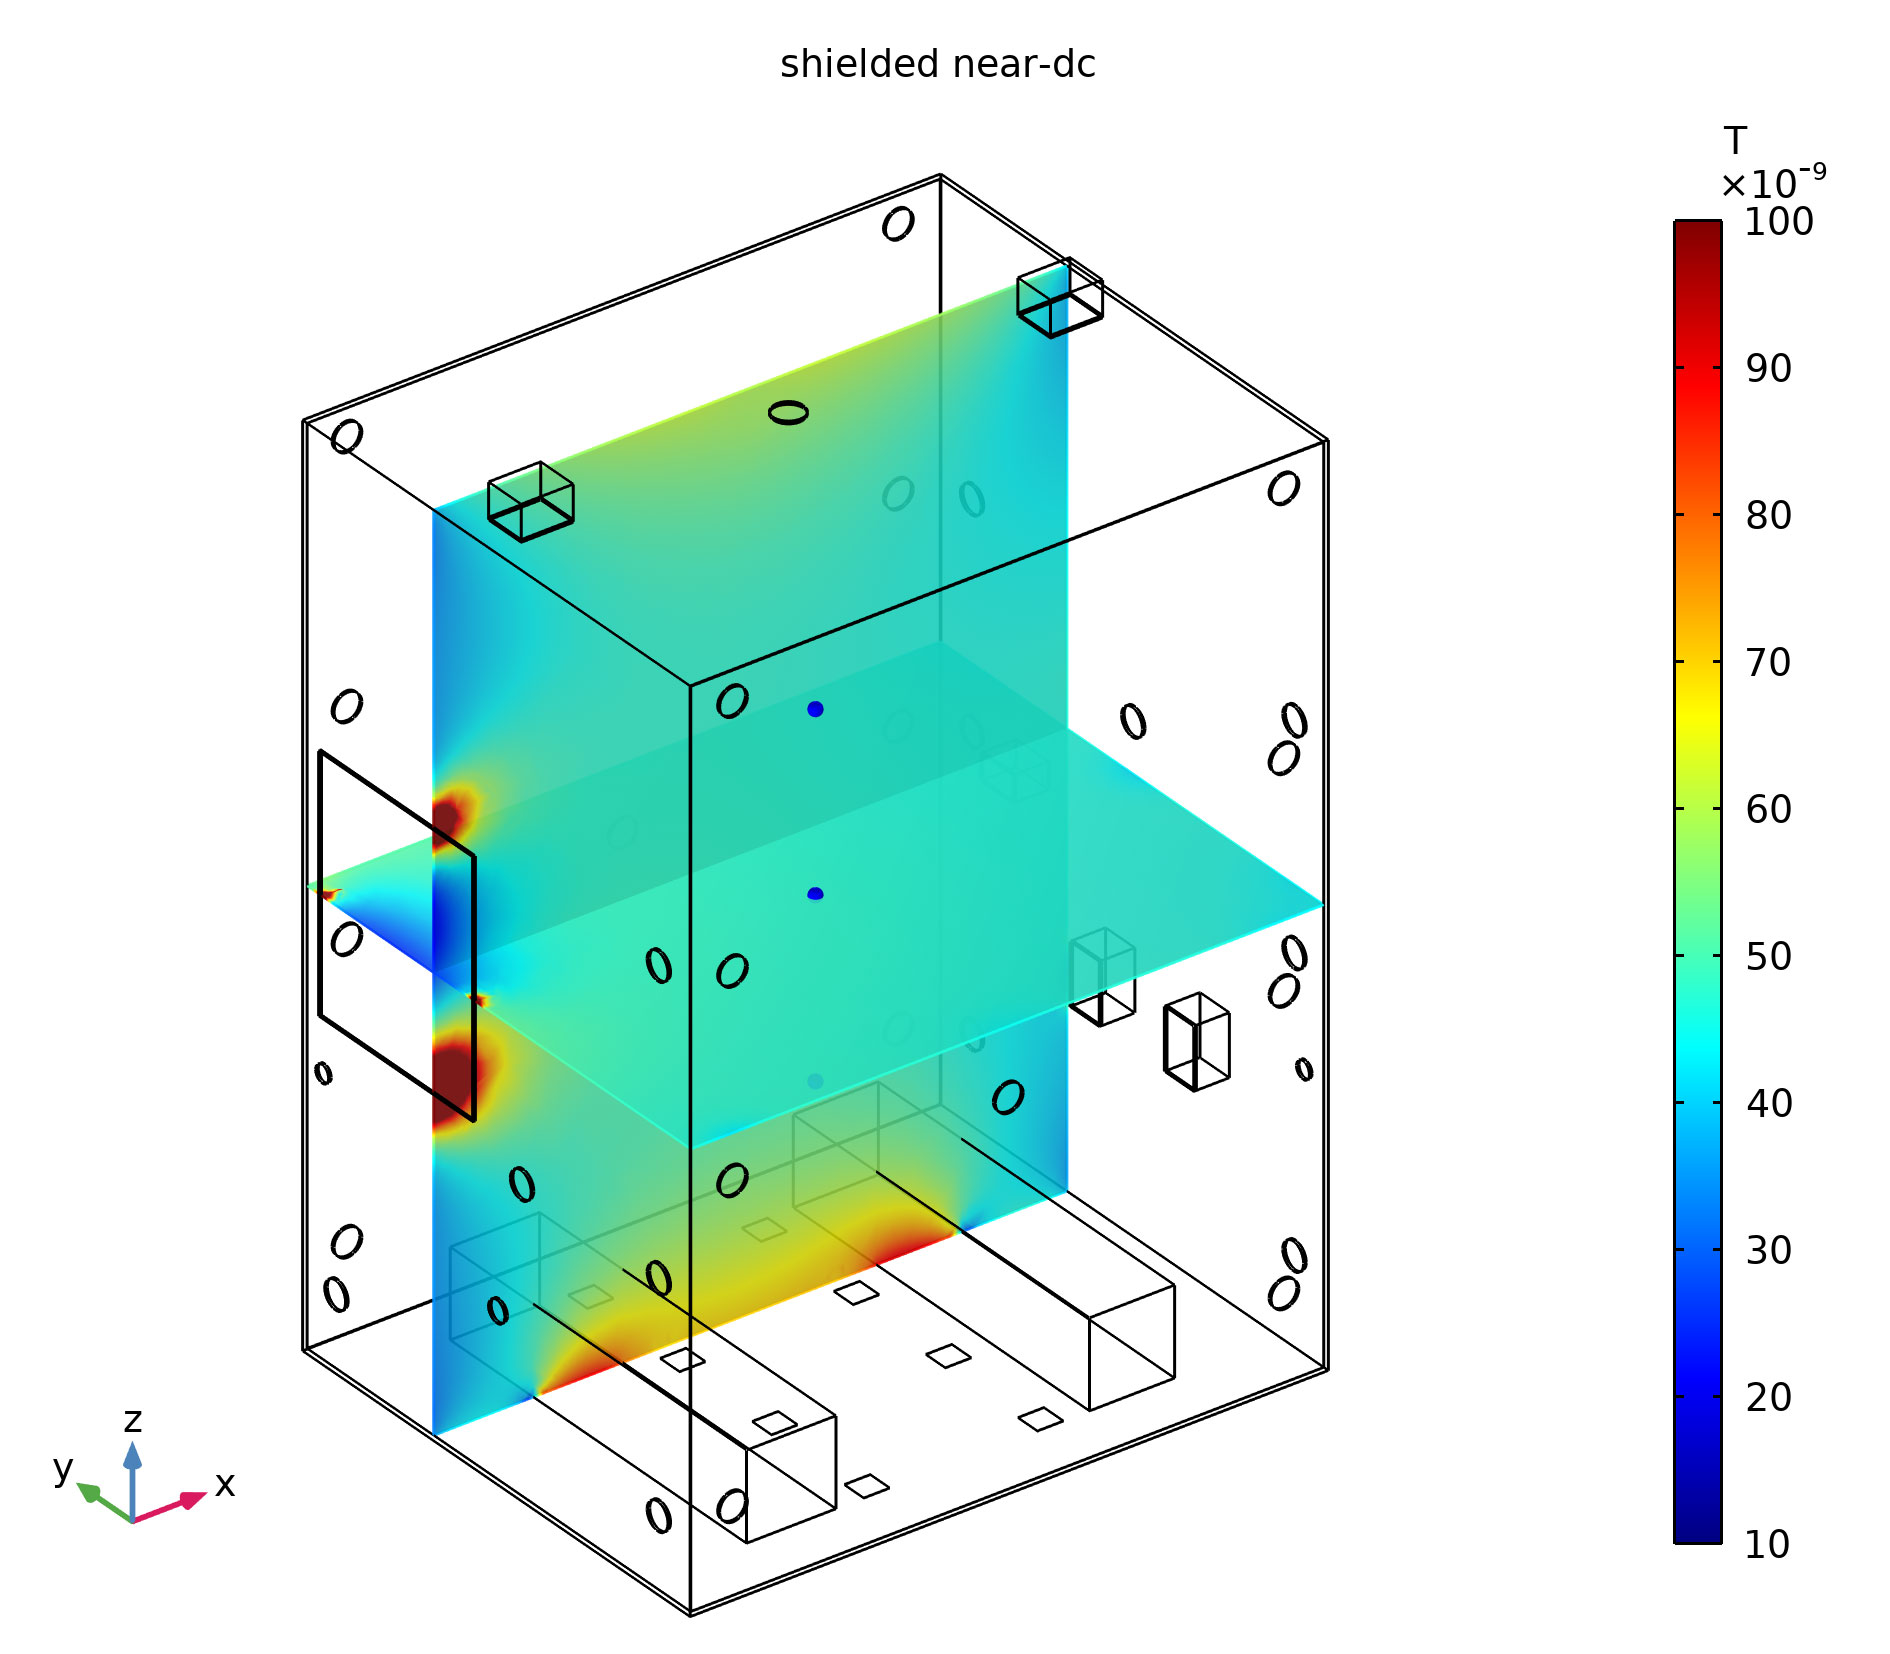 Magnetic field simulations - Shielding: Magnetic field simulation of a Systron LabShield® shielding